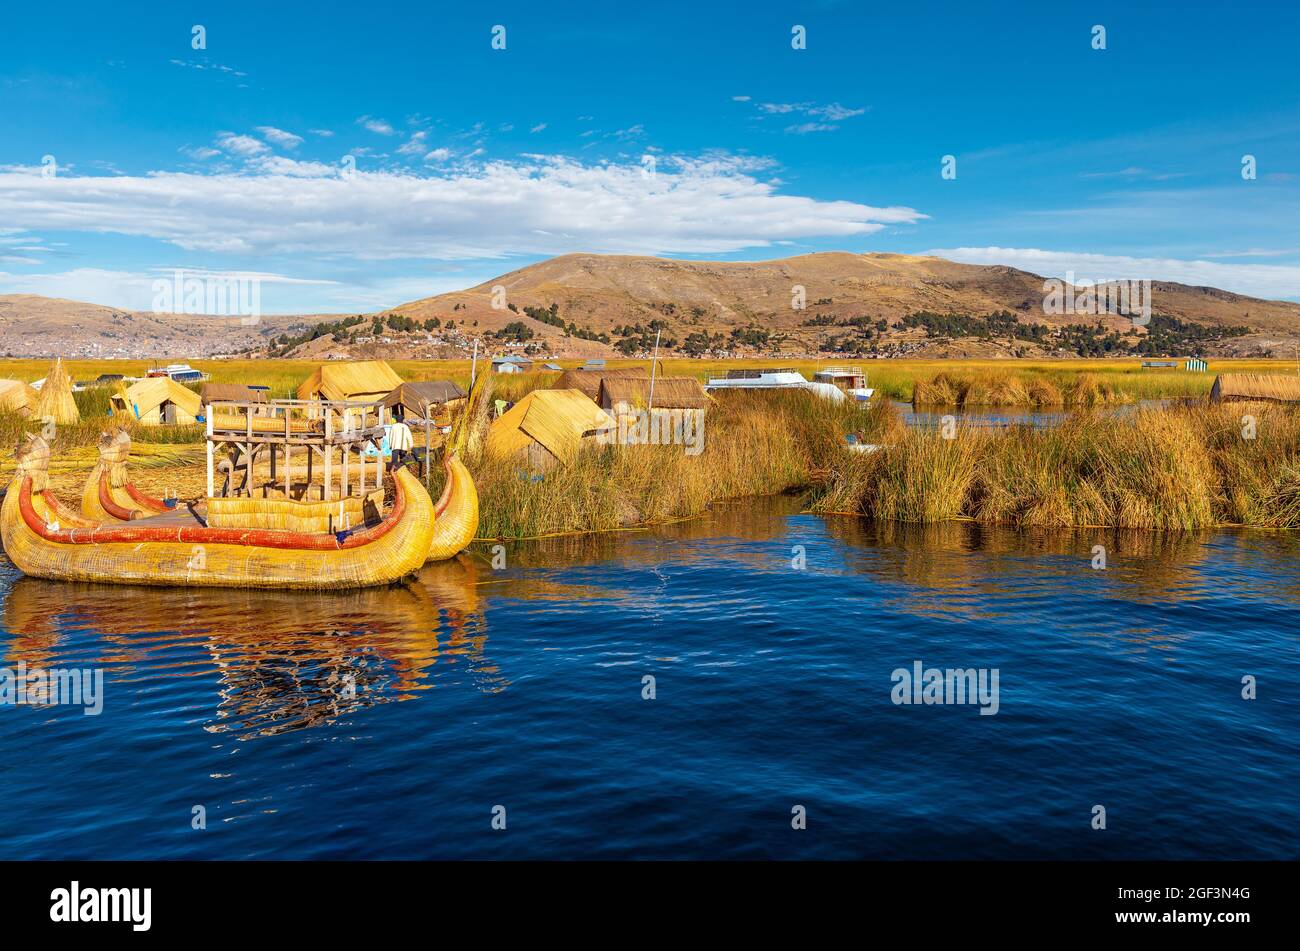 Uros floating islands with totora reed boat, Titicaca Lake, Peru. Stock Photo